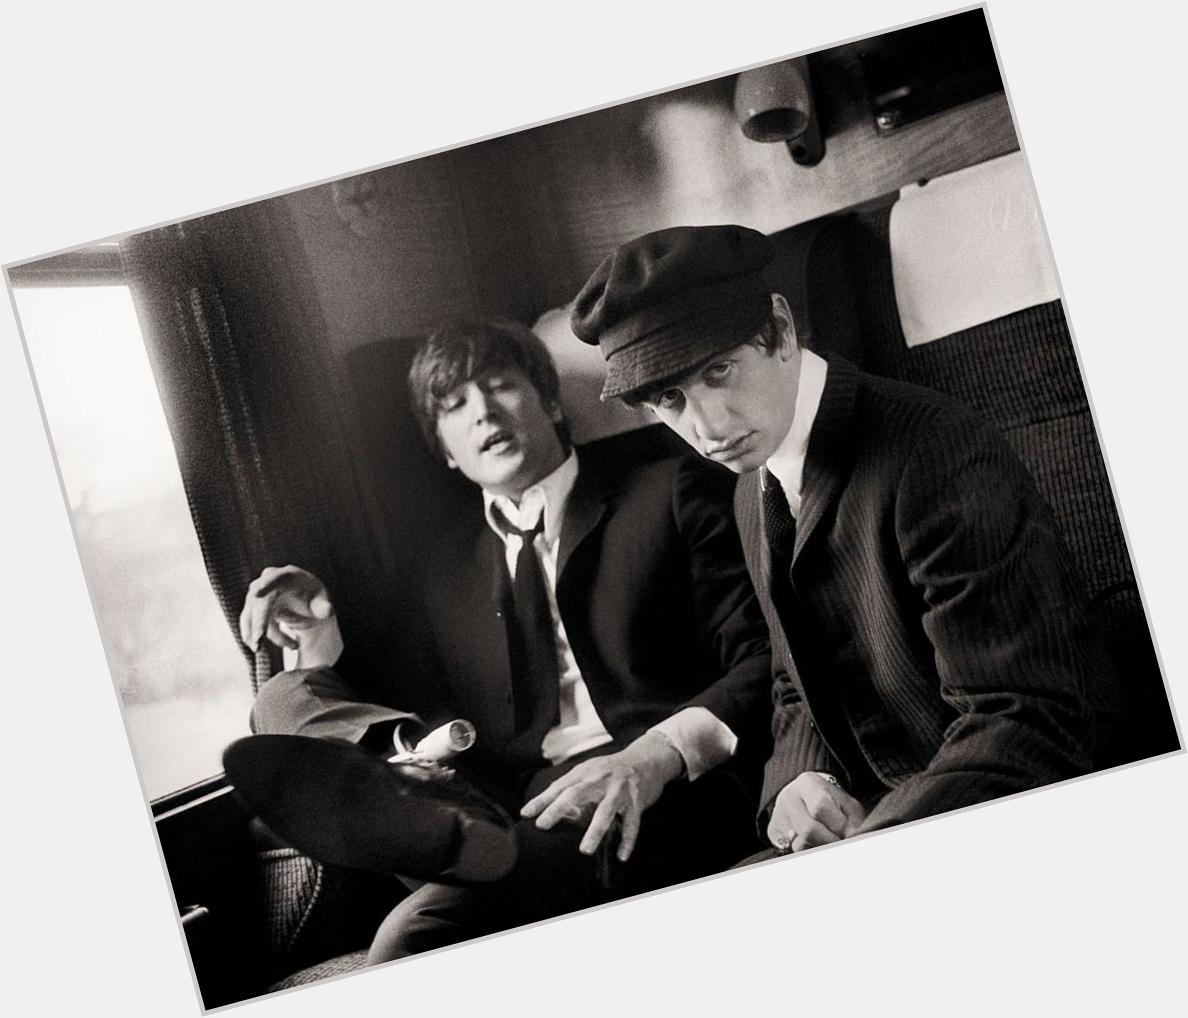 Happy birthday John Lennon, he would have been 75 today. Here he is with Ringo Starr in \A Hard Day\s Night\ (1964) 